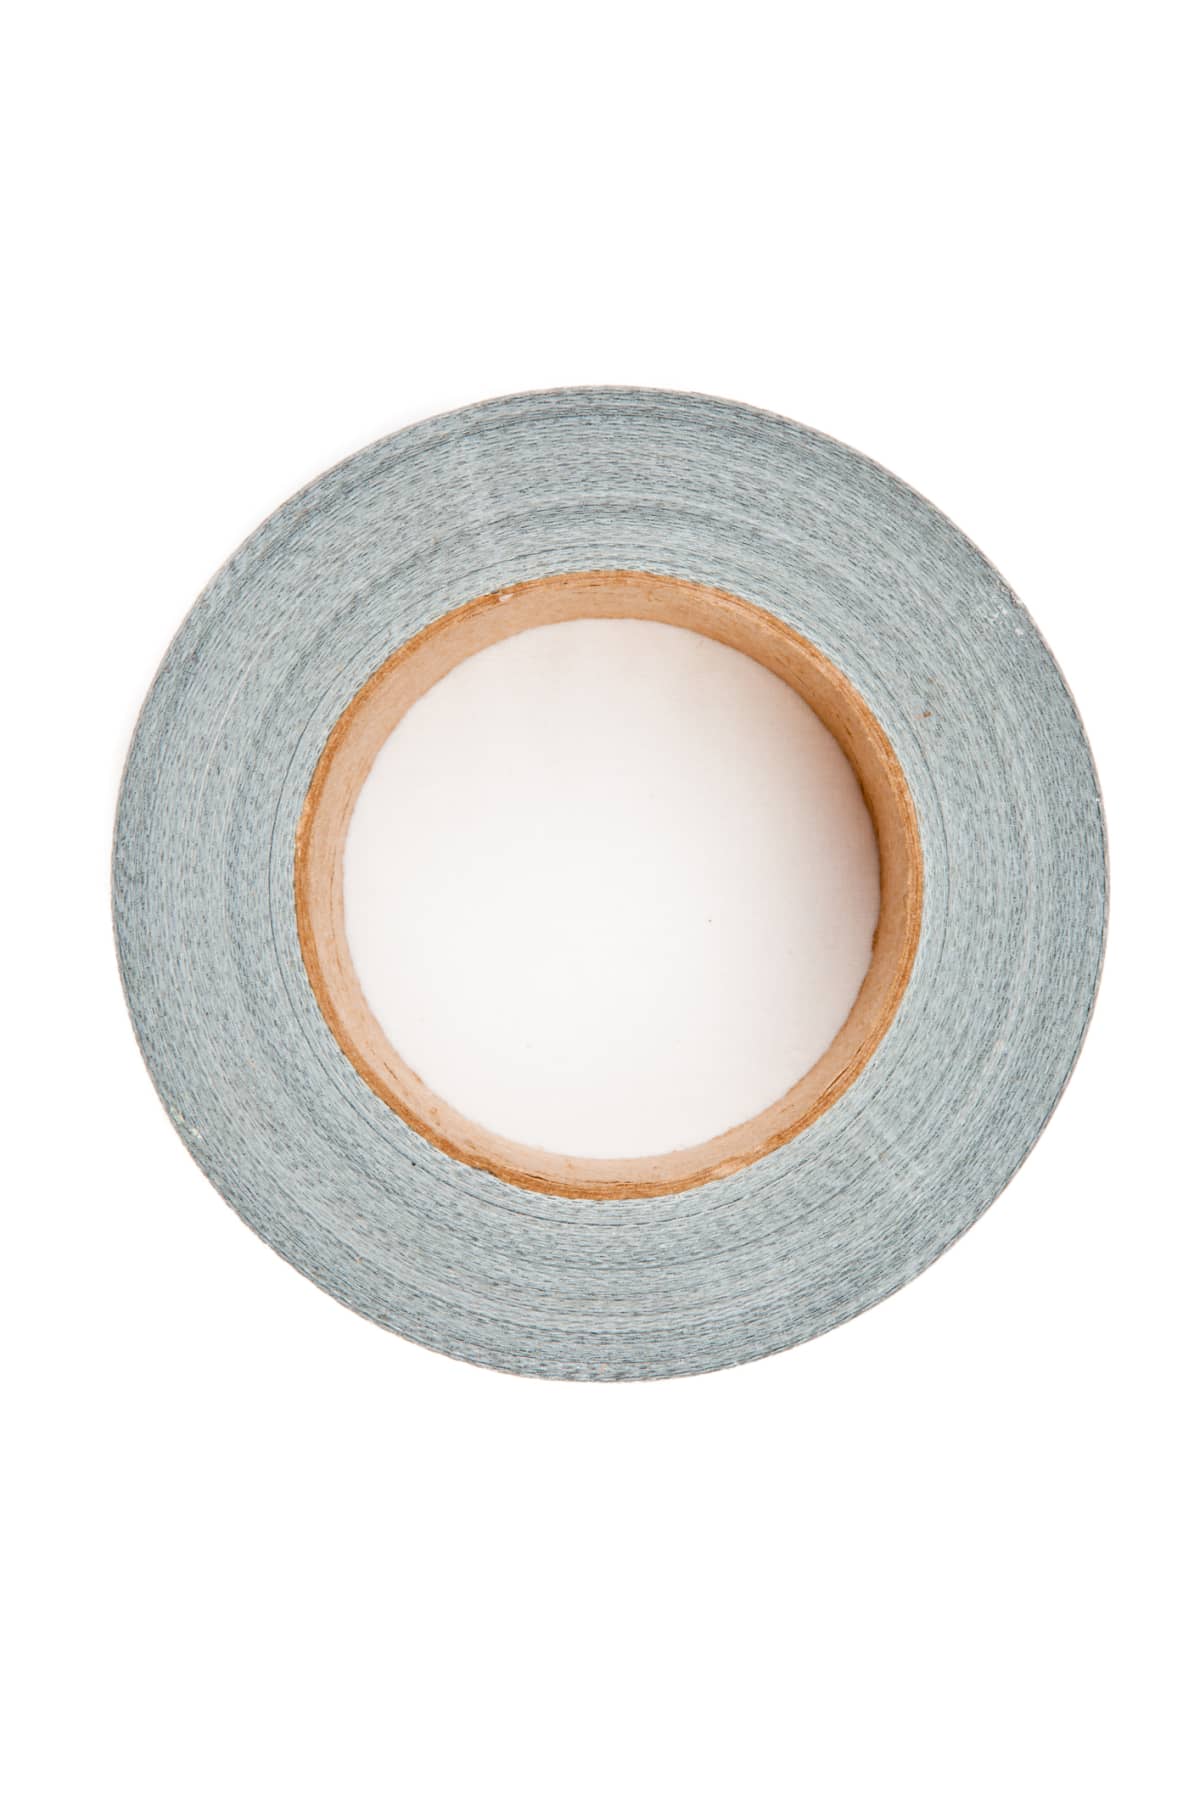 Silver adhesive tape lying on a a white background